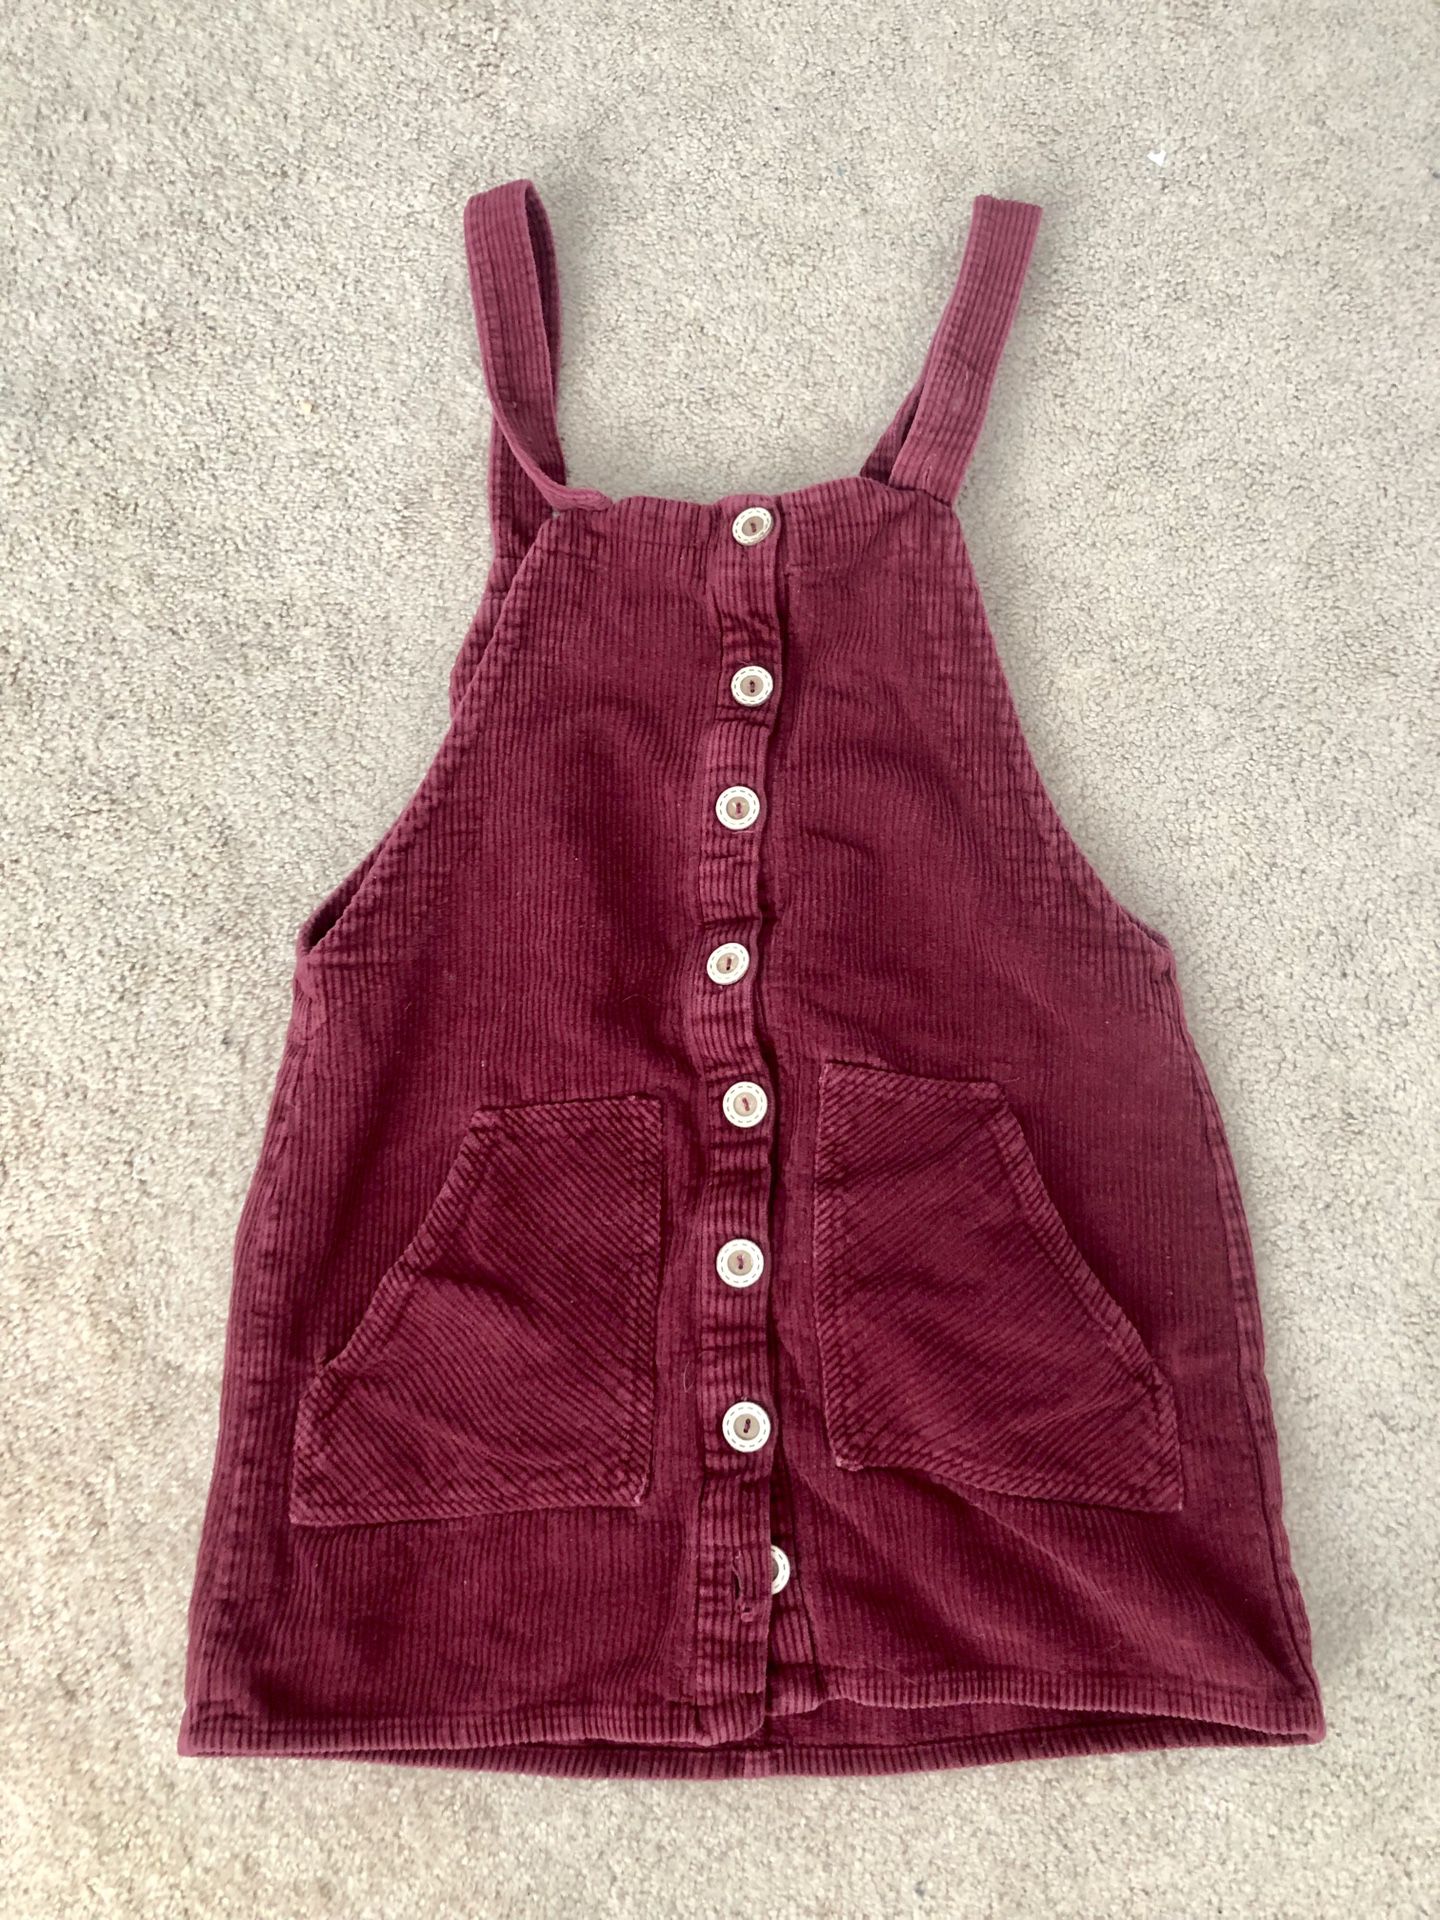 Short Red Overall Dress, Forever 21, Size Small